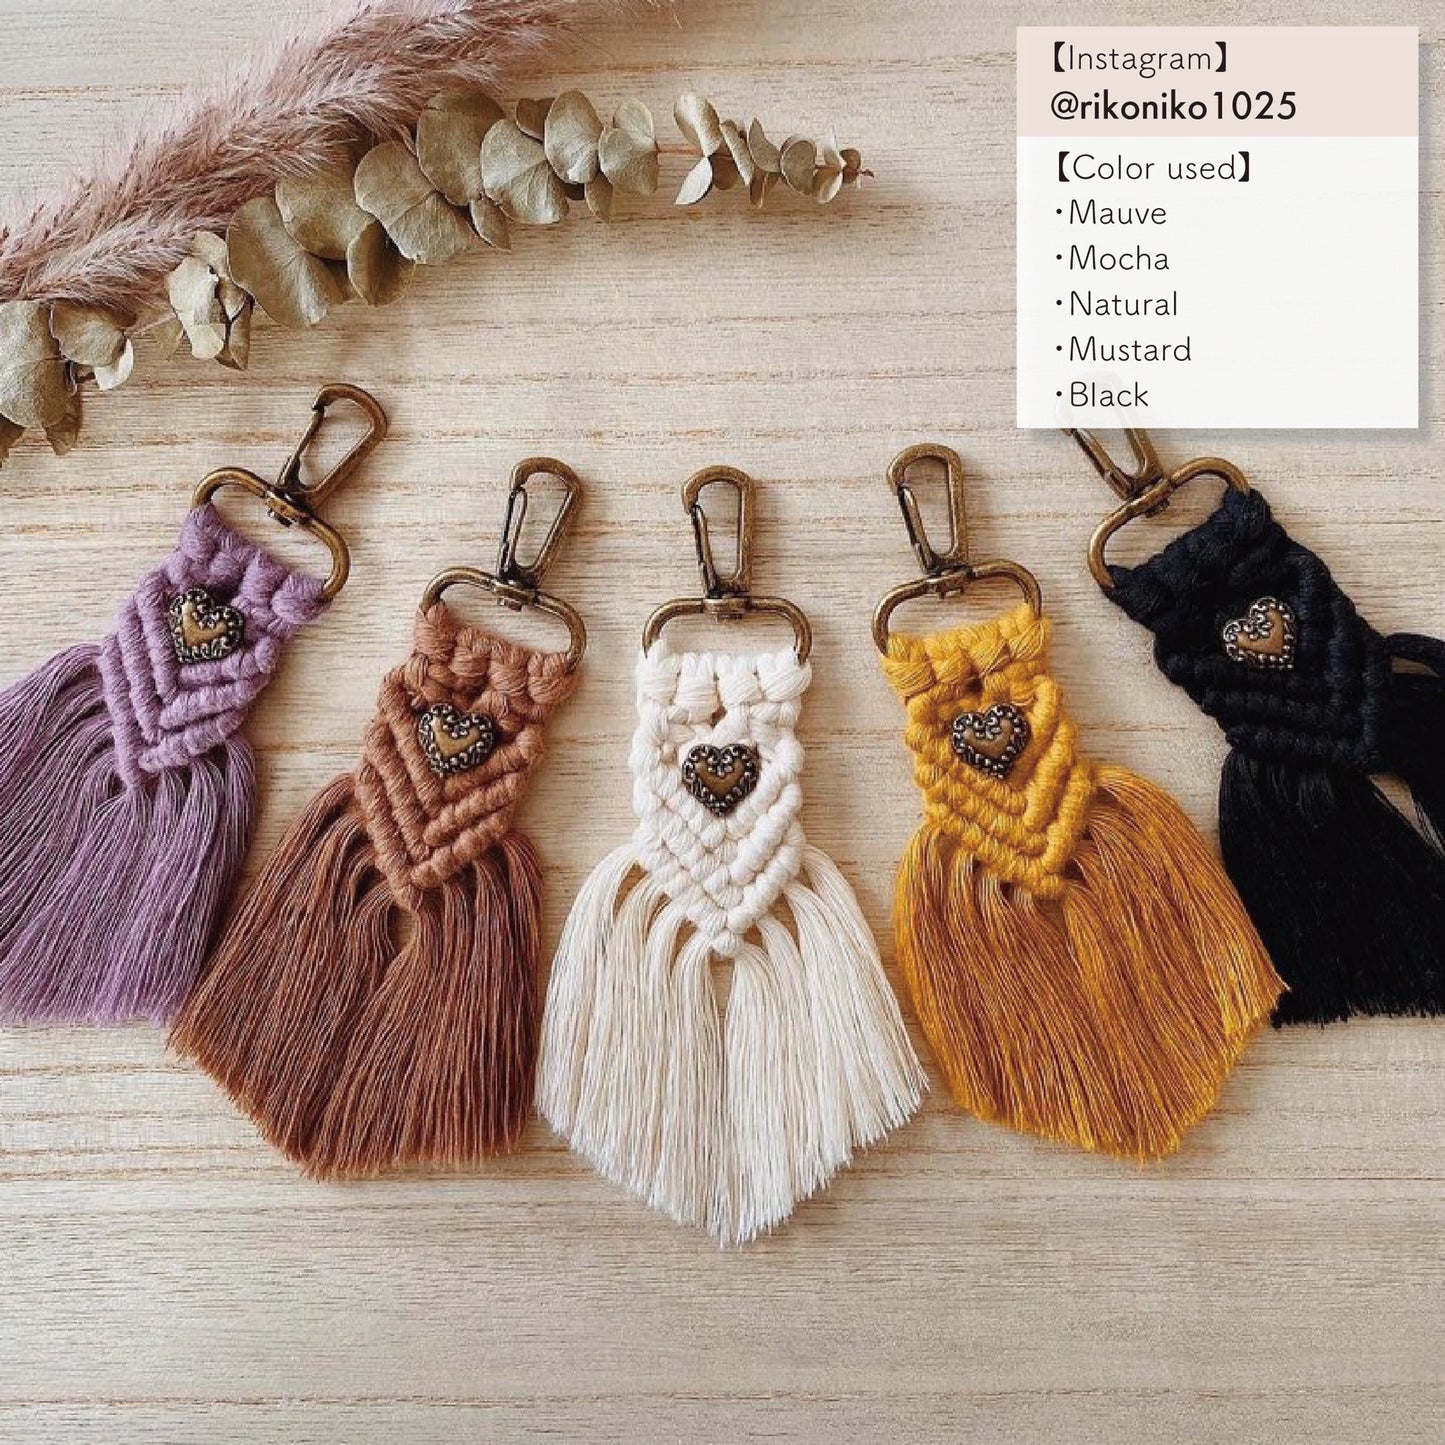 3.5mm/Mustard(MU)/100m (about 250g) Single-Strand fair trade organic cotton macrame color cord made in Japan